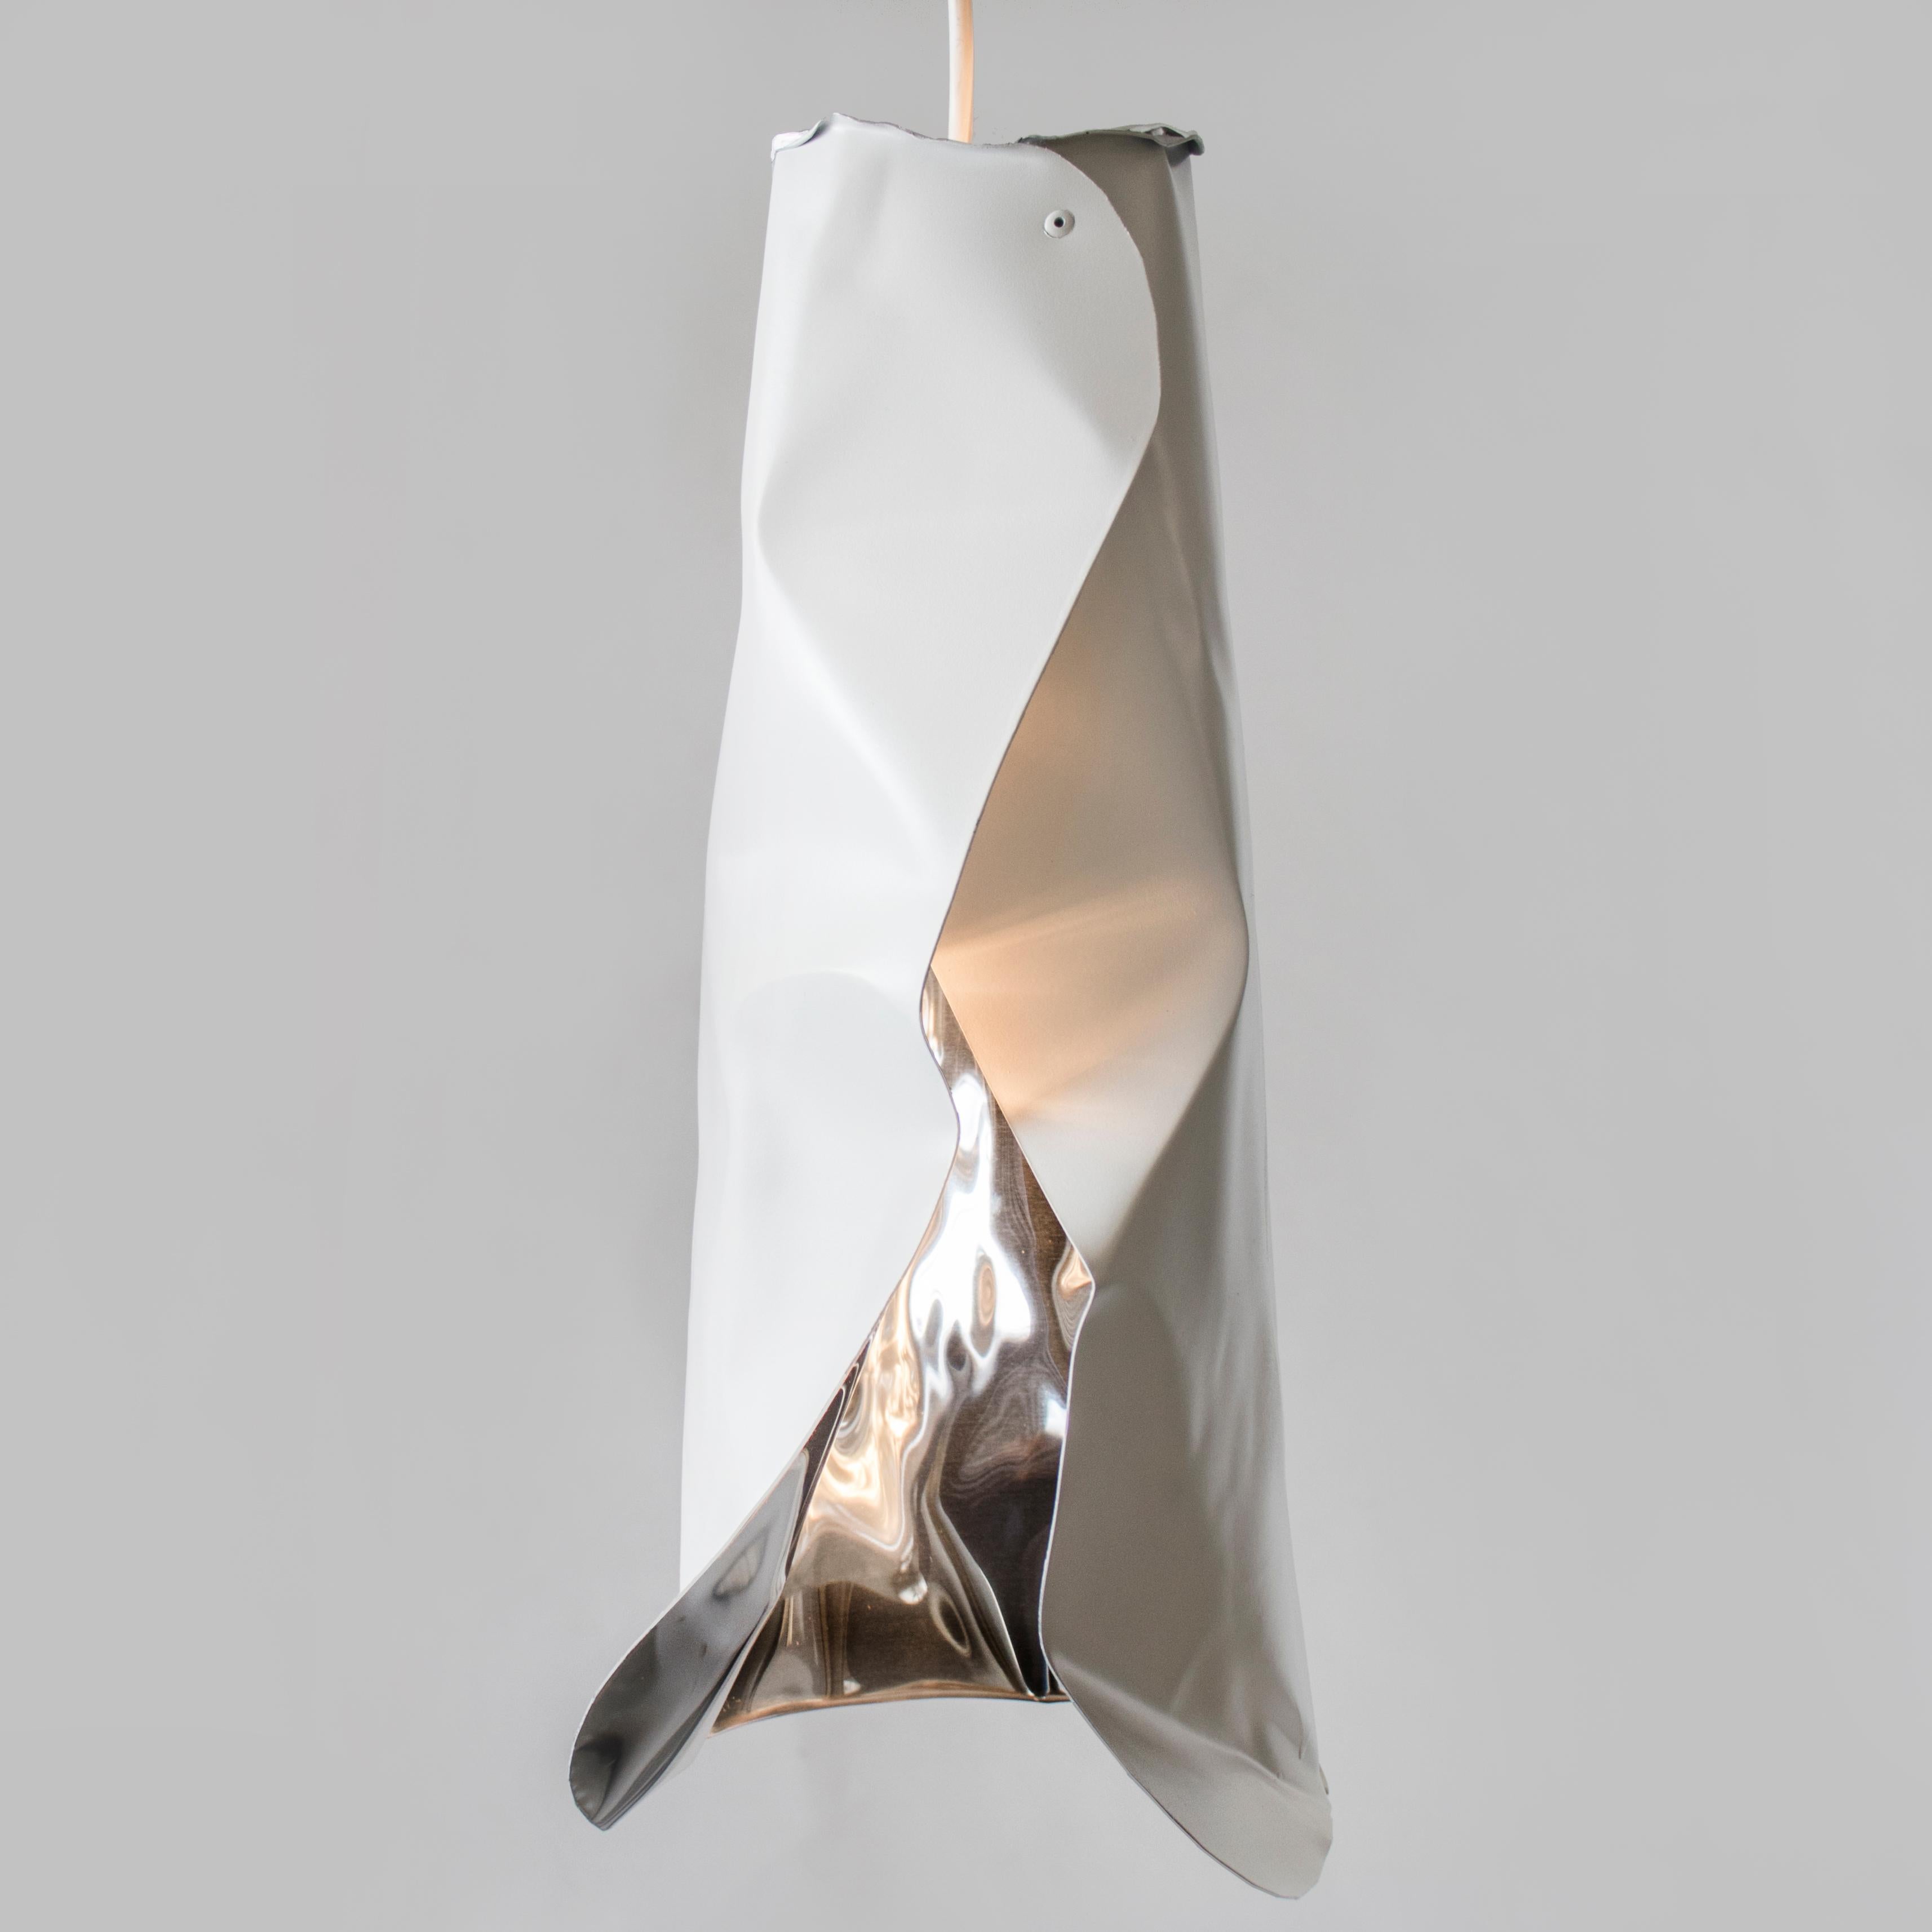 The LUSTER Pendant is handcrafted from polished aluminum. Each piece is individually sculpted by hand, so while similar no two pieces are alike. The effect is a stunning warm glow that works in residential, hospitality and commercial